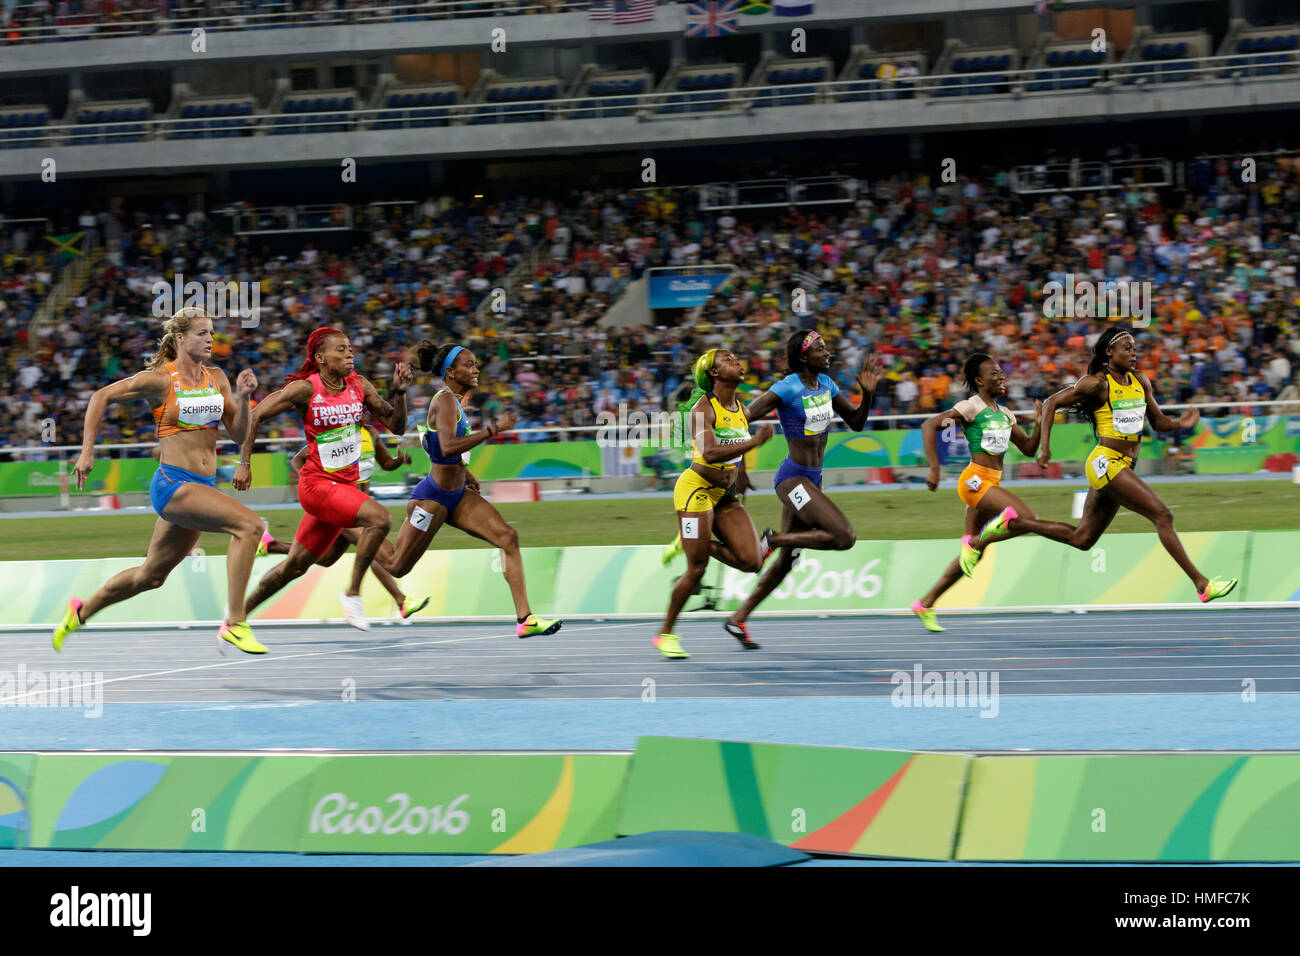 Rio de Janeiro, Brazil. 13 August 2016 .Elaine Thiompson (JAM) leads the field on her way to winning the gold medal in the Women's 100m at the 2016 Ol Stock Photo